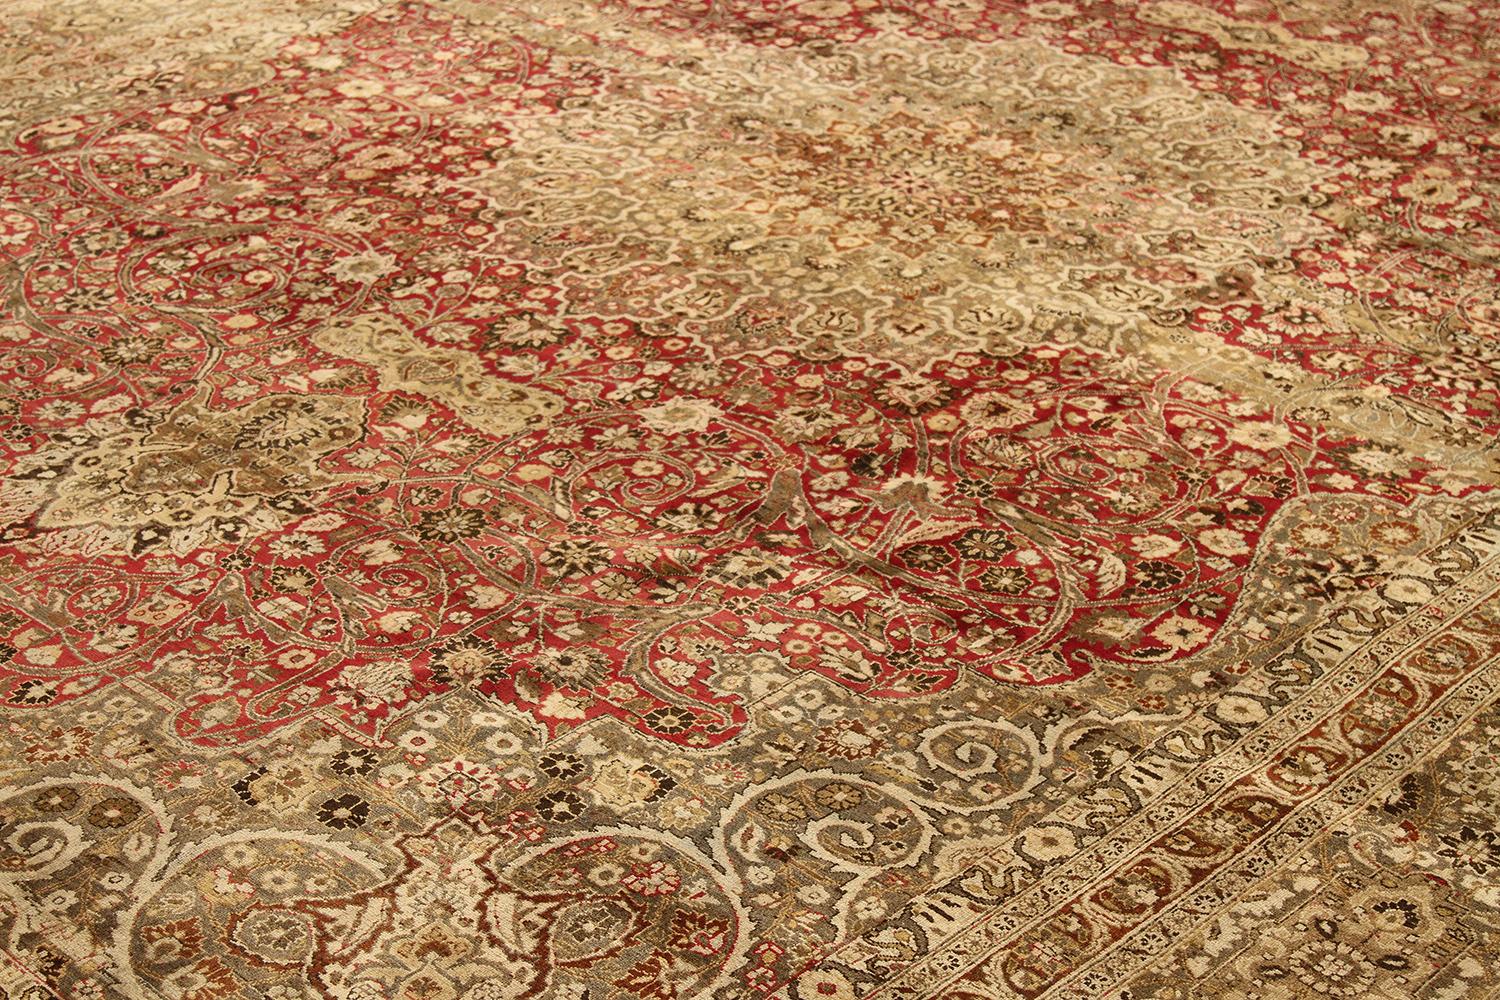 Other Large Antique Persian Mashad Rug with Beige and Brown Florals Over Red Field For Sale